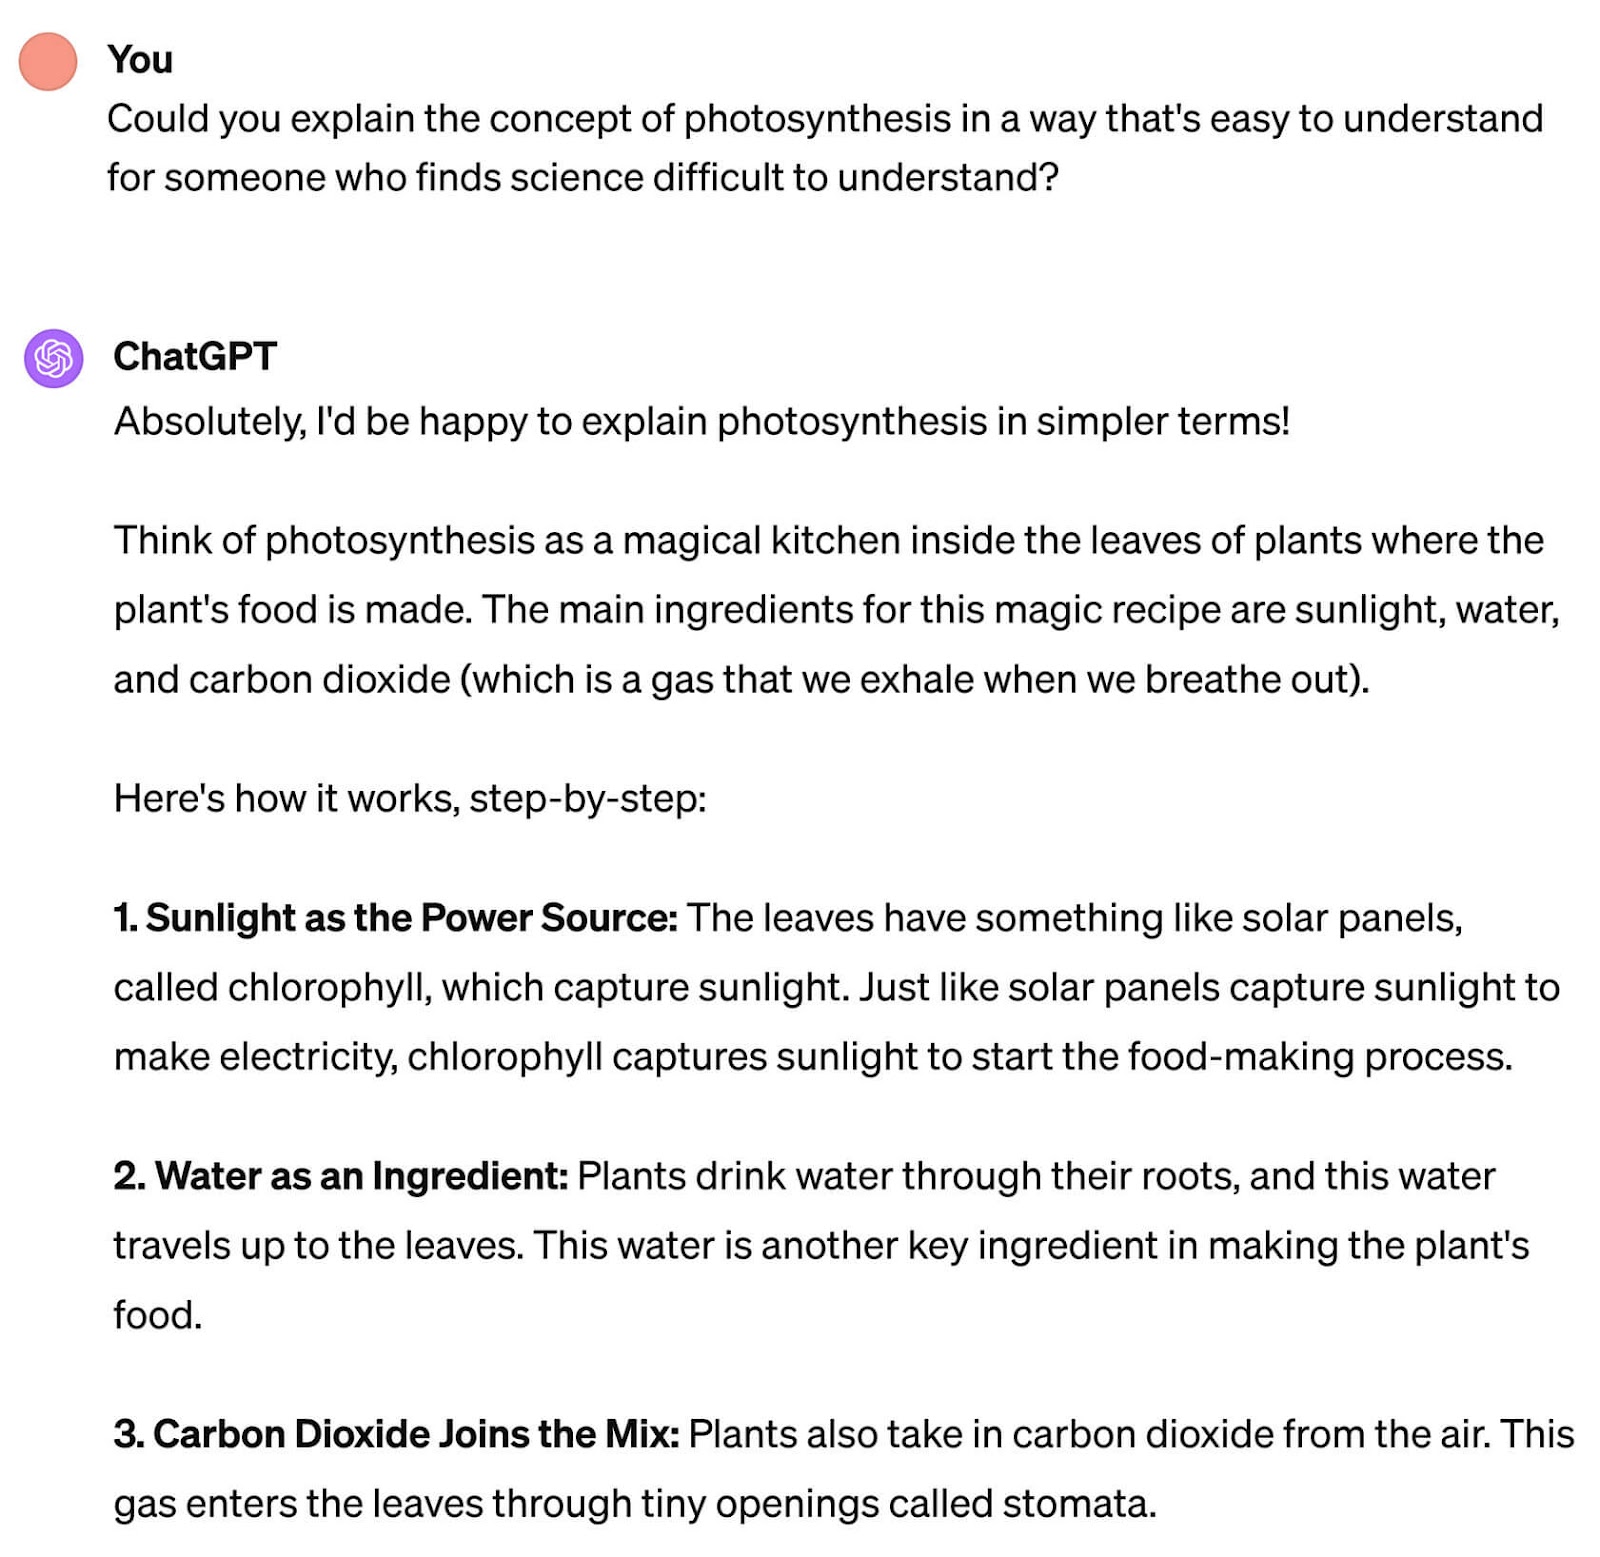 A prompt asking ChatGPT to explain the concept of photosynthesis in a way that is easy to understand